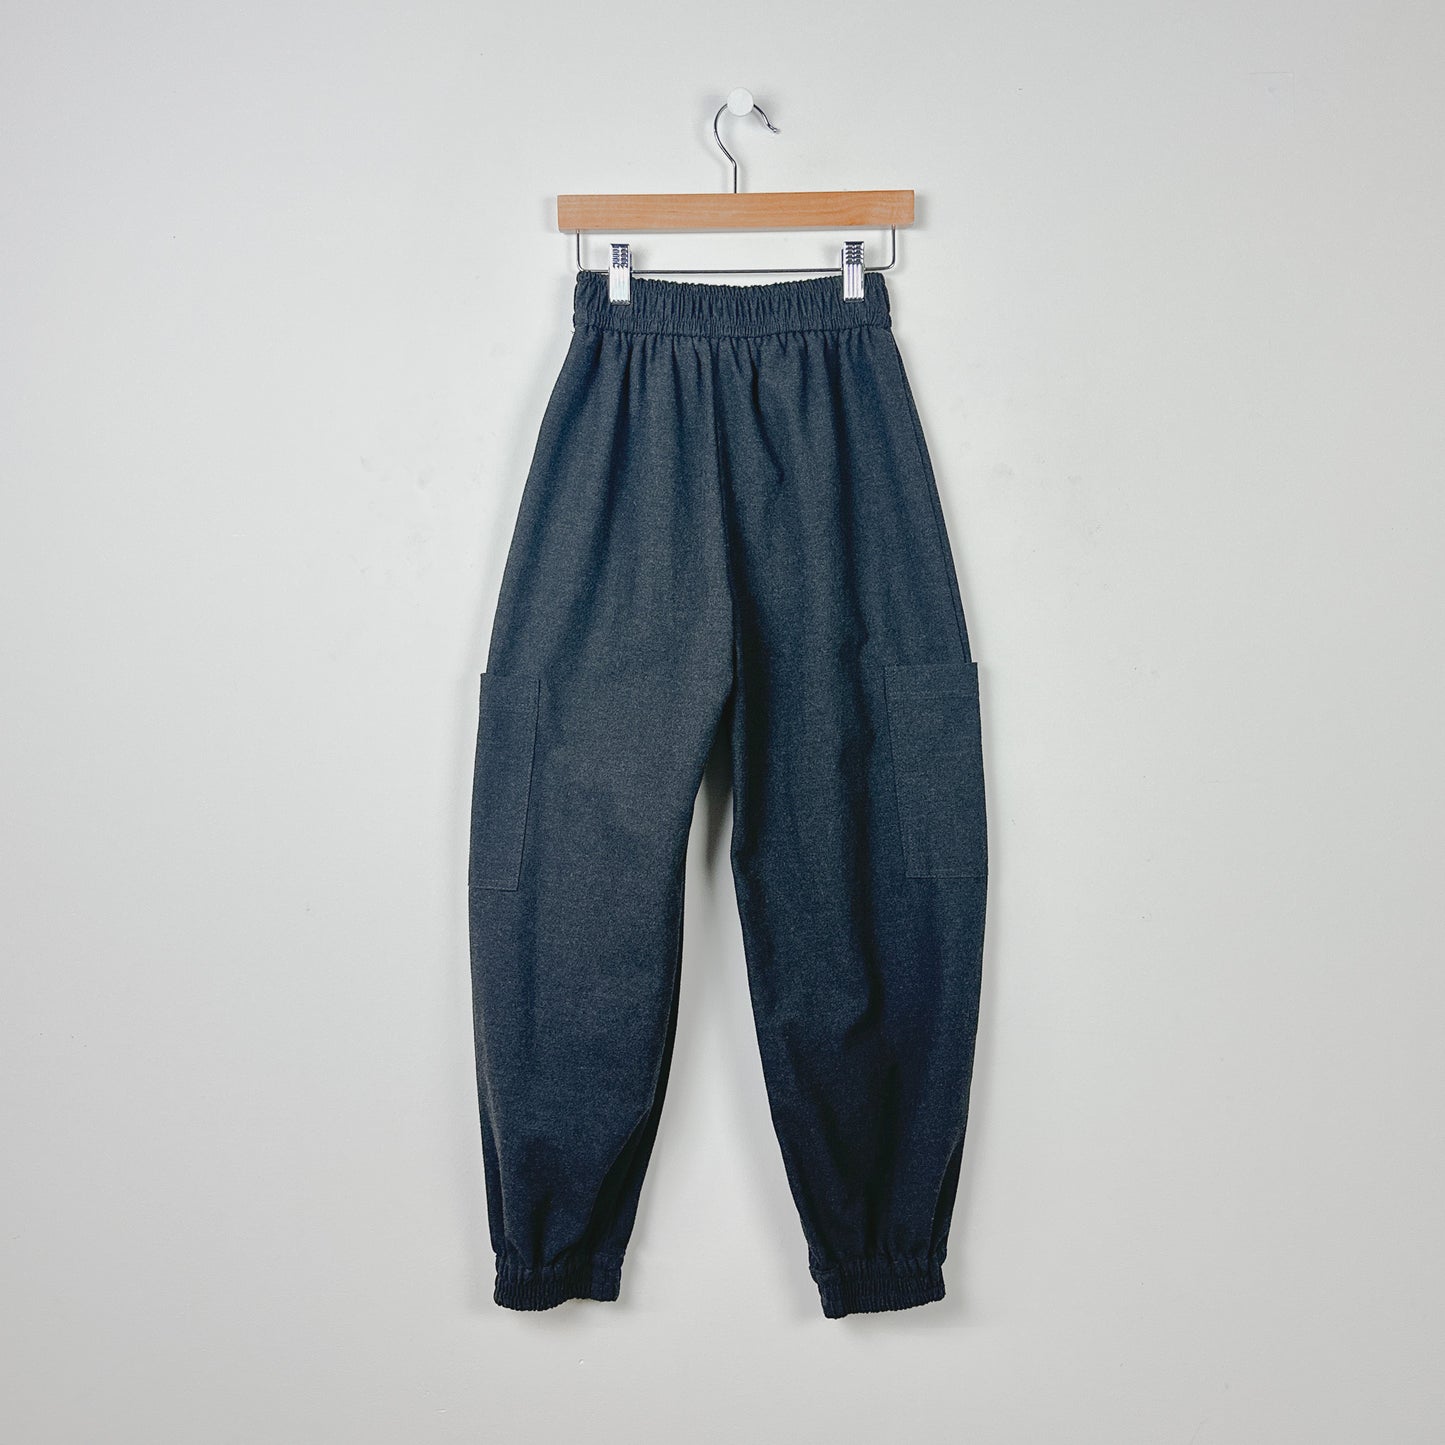 Brushed Cotton Charcoal Cargos - Size 10yr